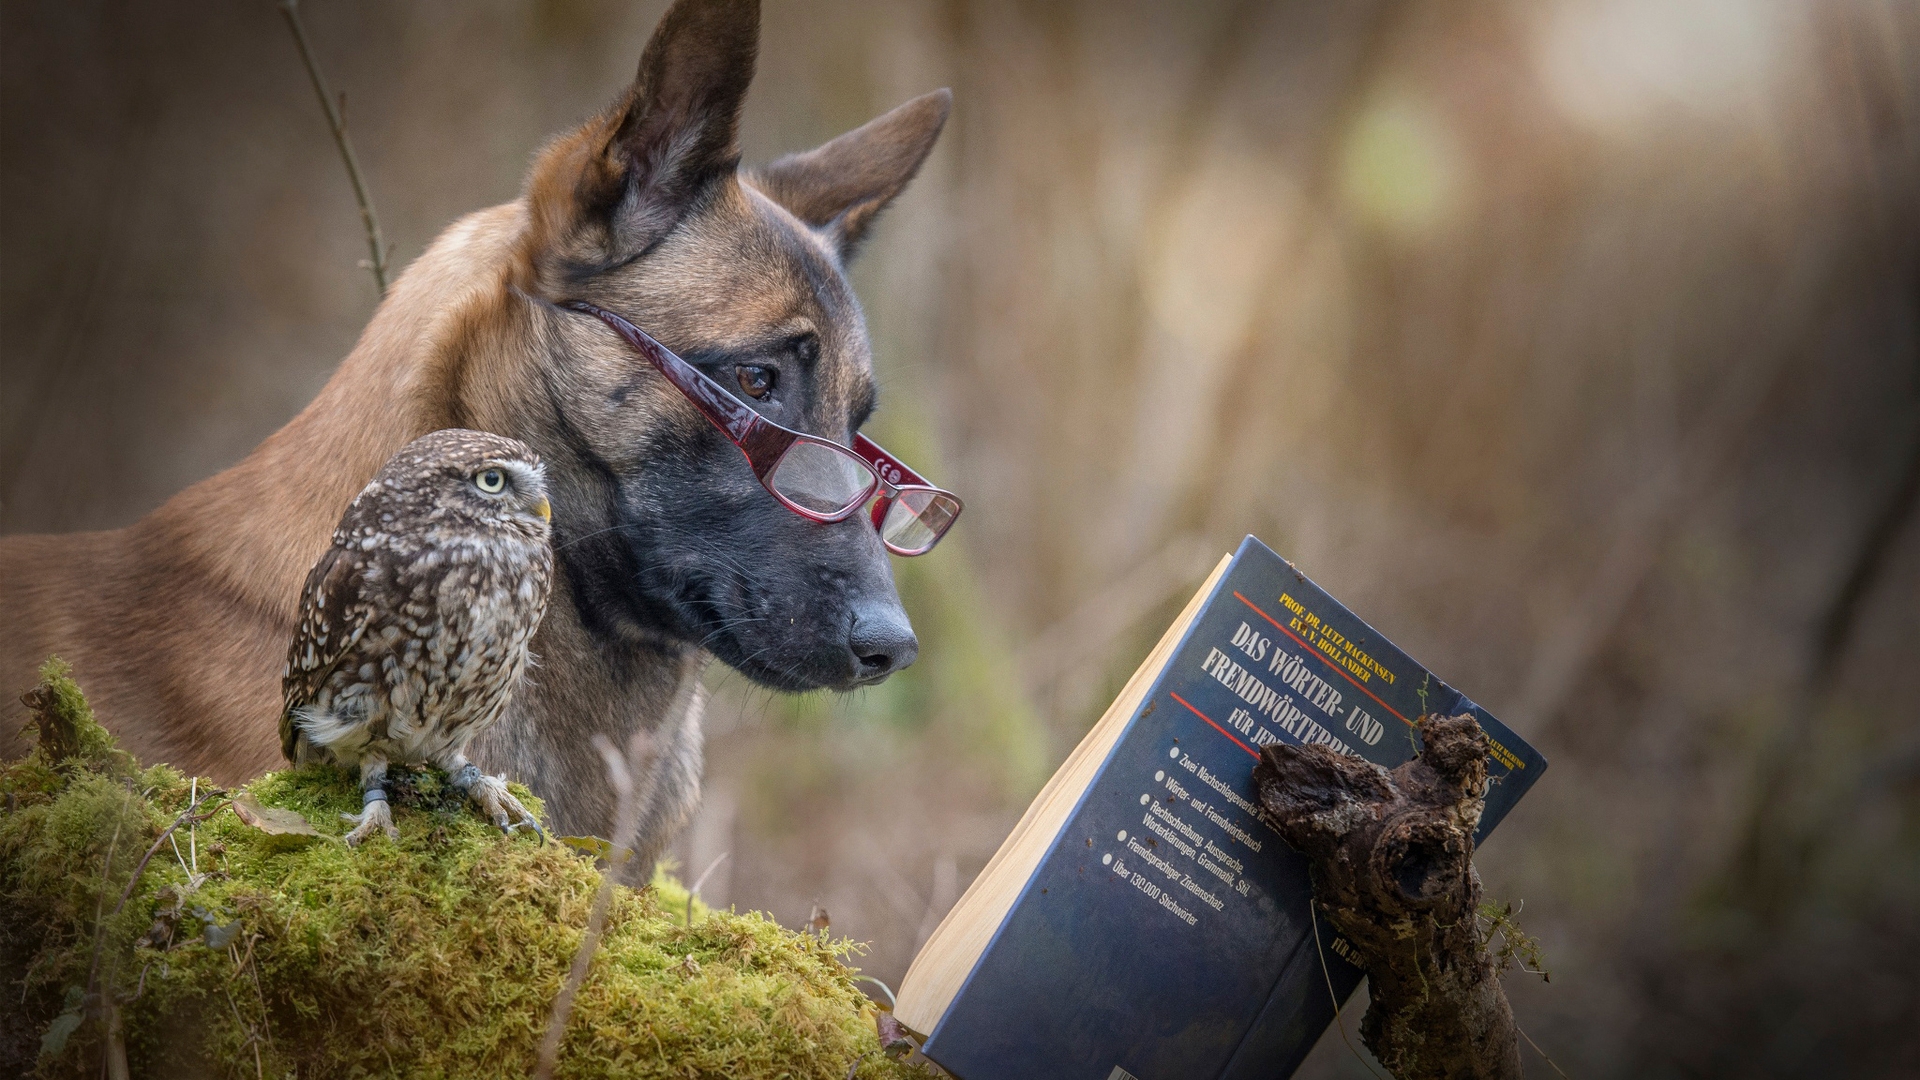 Dog and Owl Reading a Book for 1920 x 1080 HDTV 1080p resolution